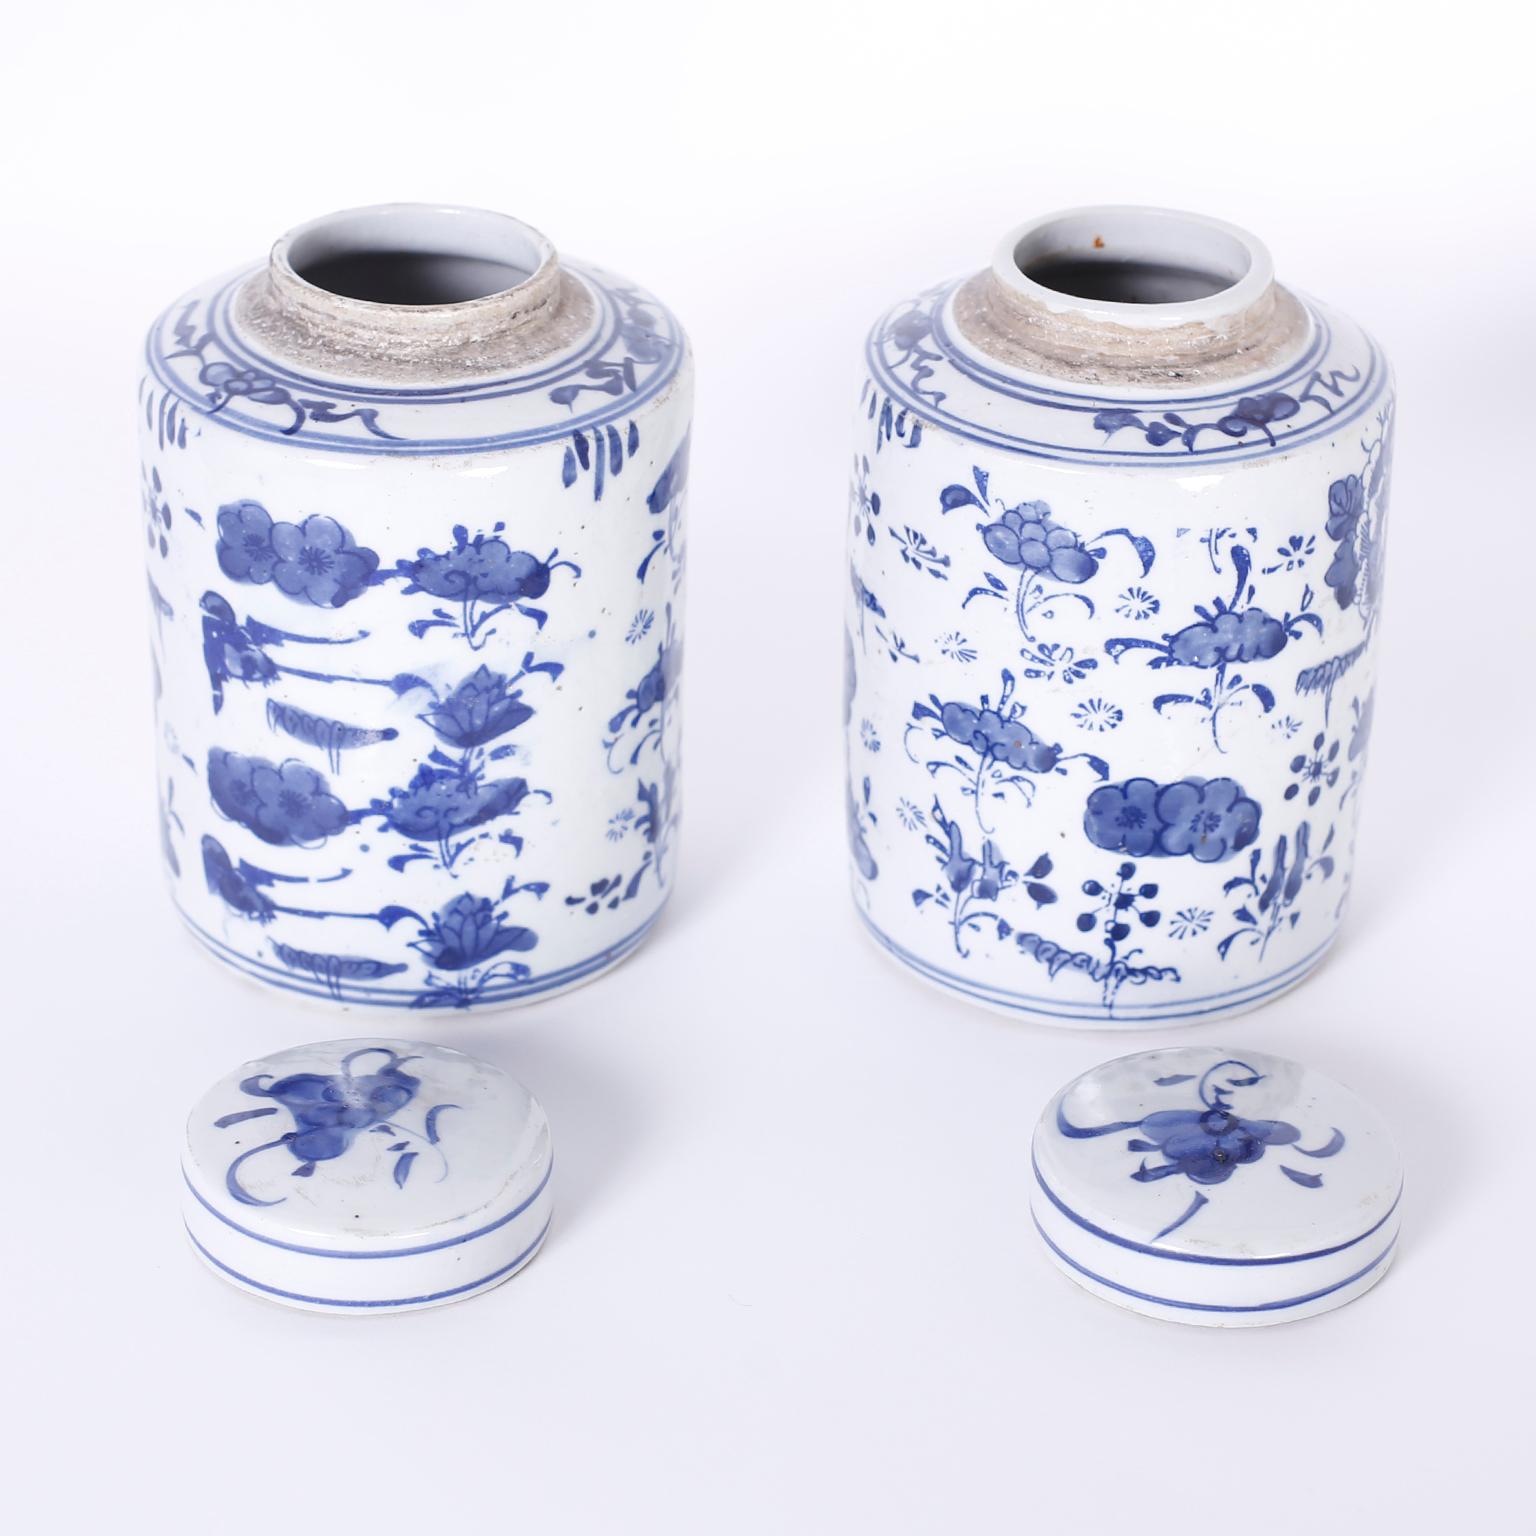 Chinoiserie Pair of Blue and White Porcelain Tea Caddies or Canisters